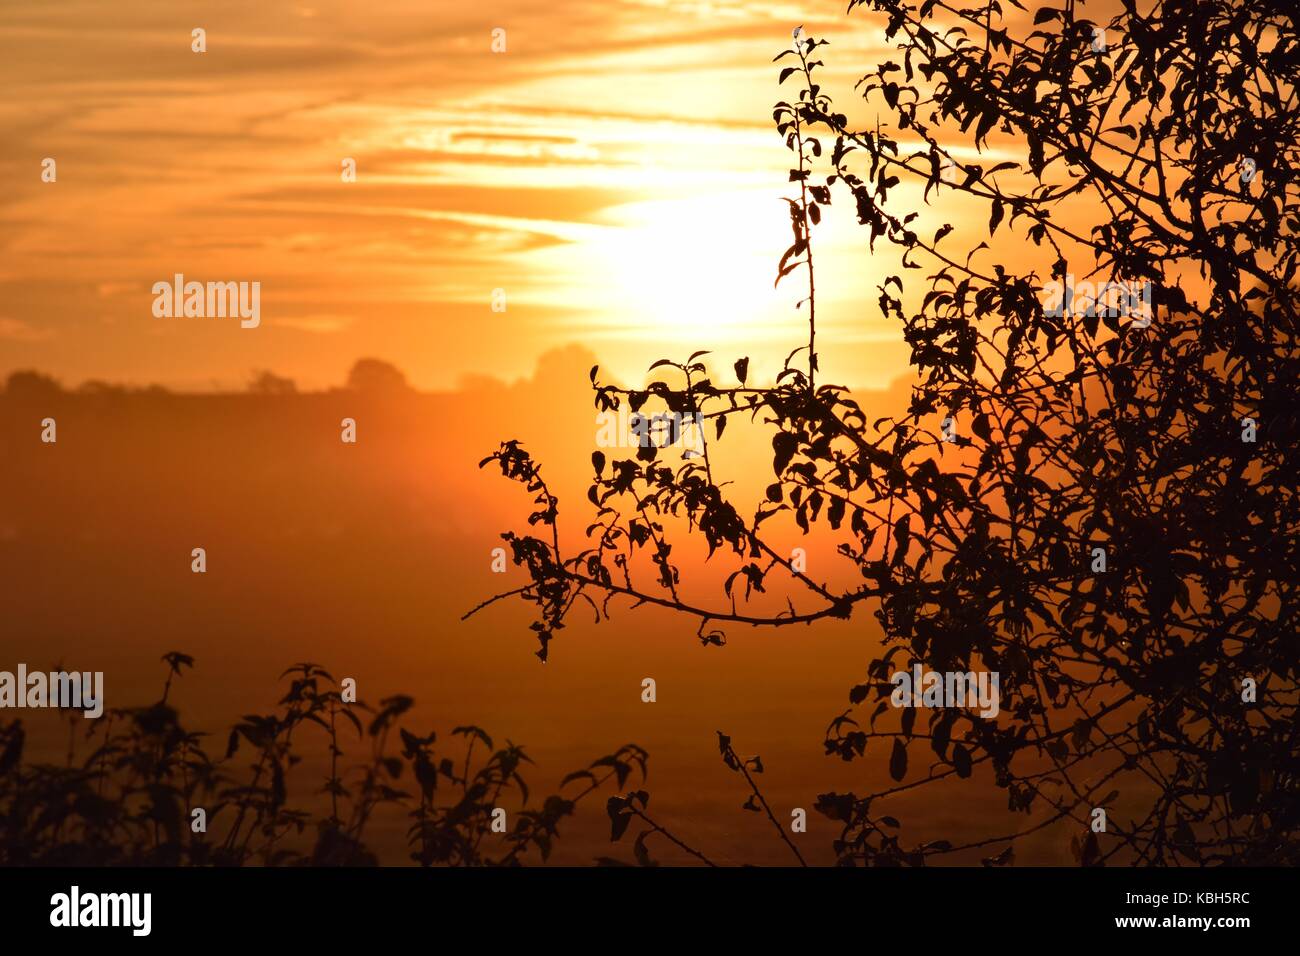 Sunrise over the fields in Yeovilton Somerset. The bright sun in the golden hour. Silhouettes of the trees. Misty early morning. Peaceful travelling. Stock Photo